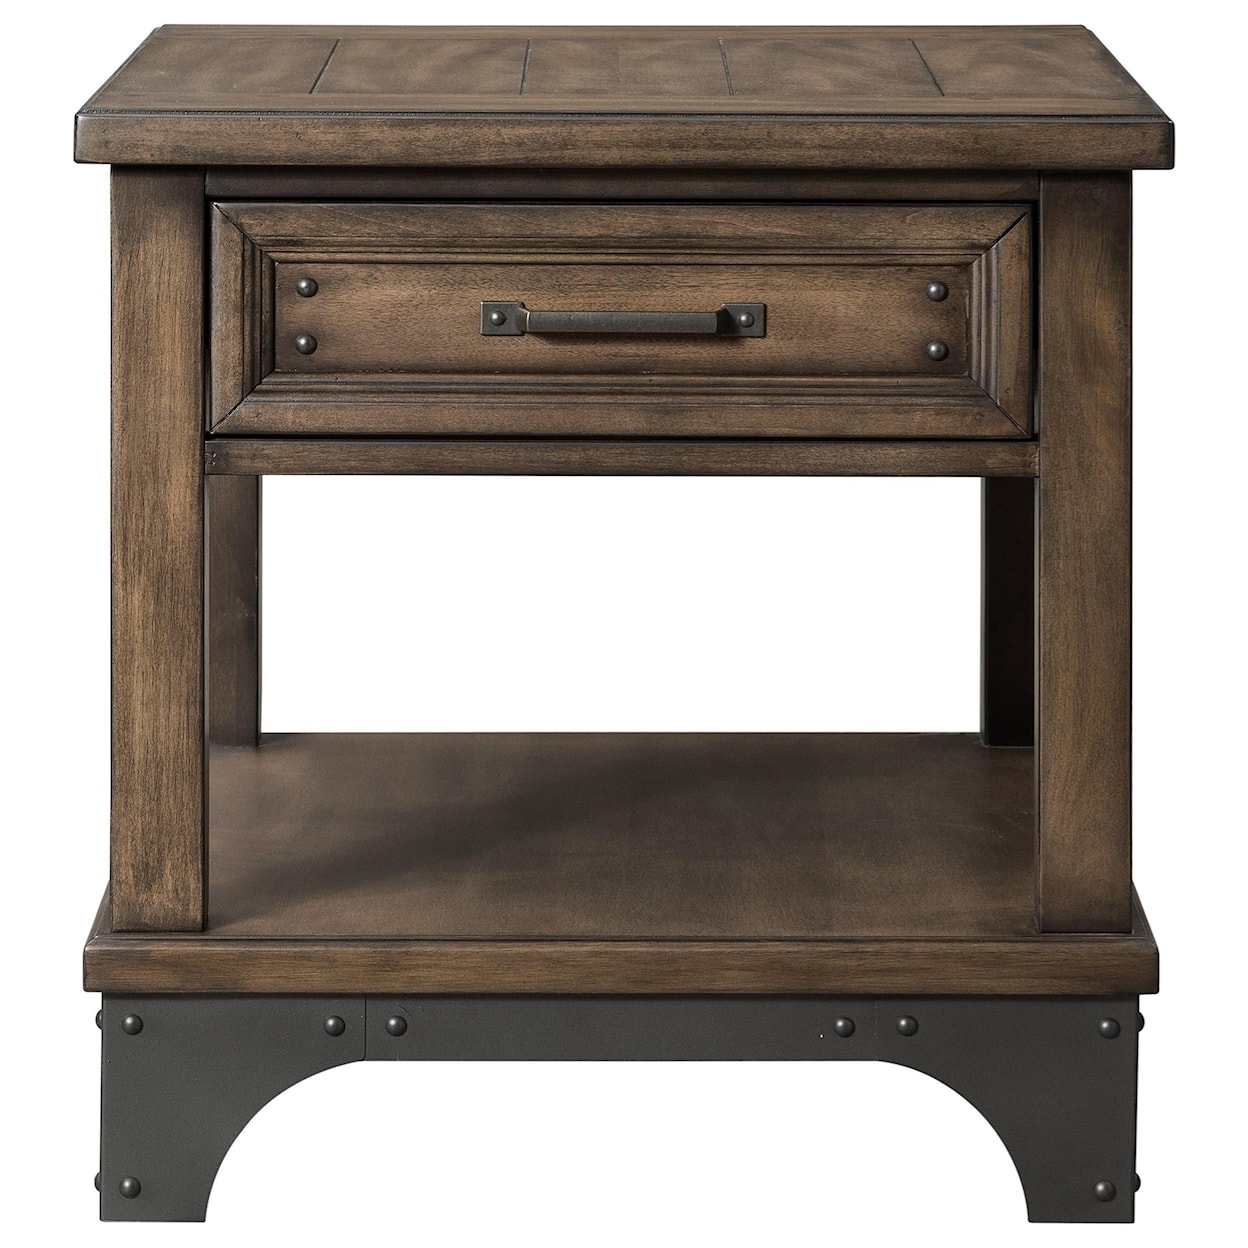 Intercon Whiskey River  End Table